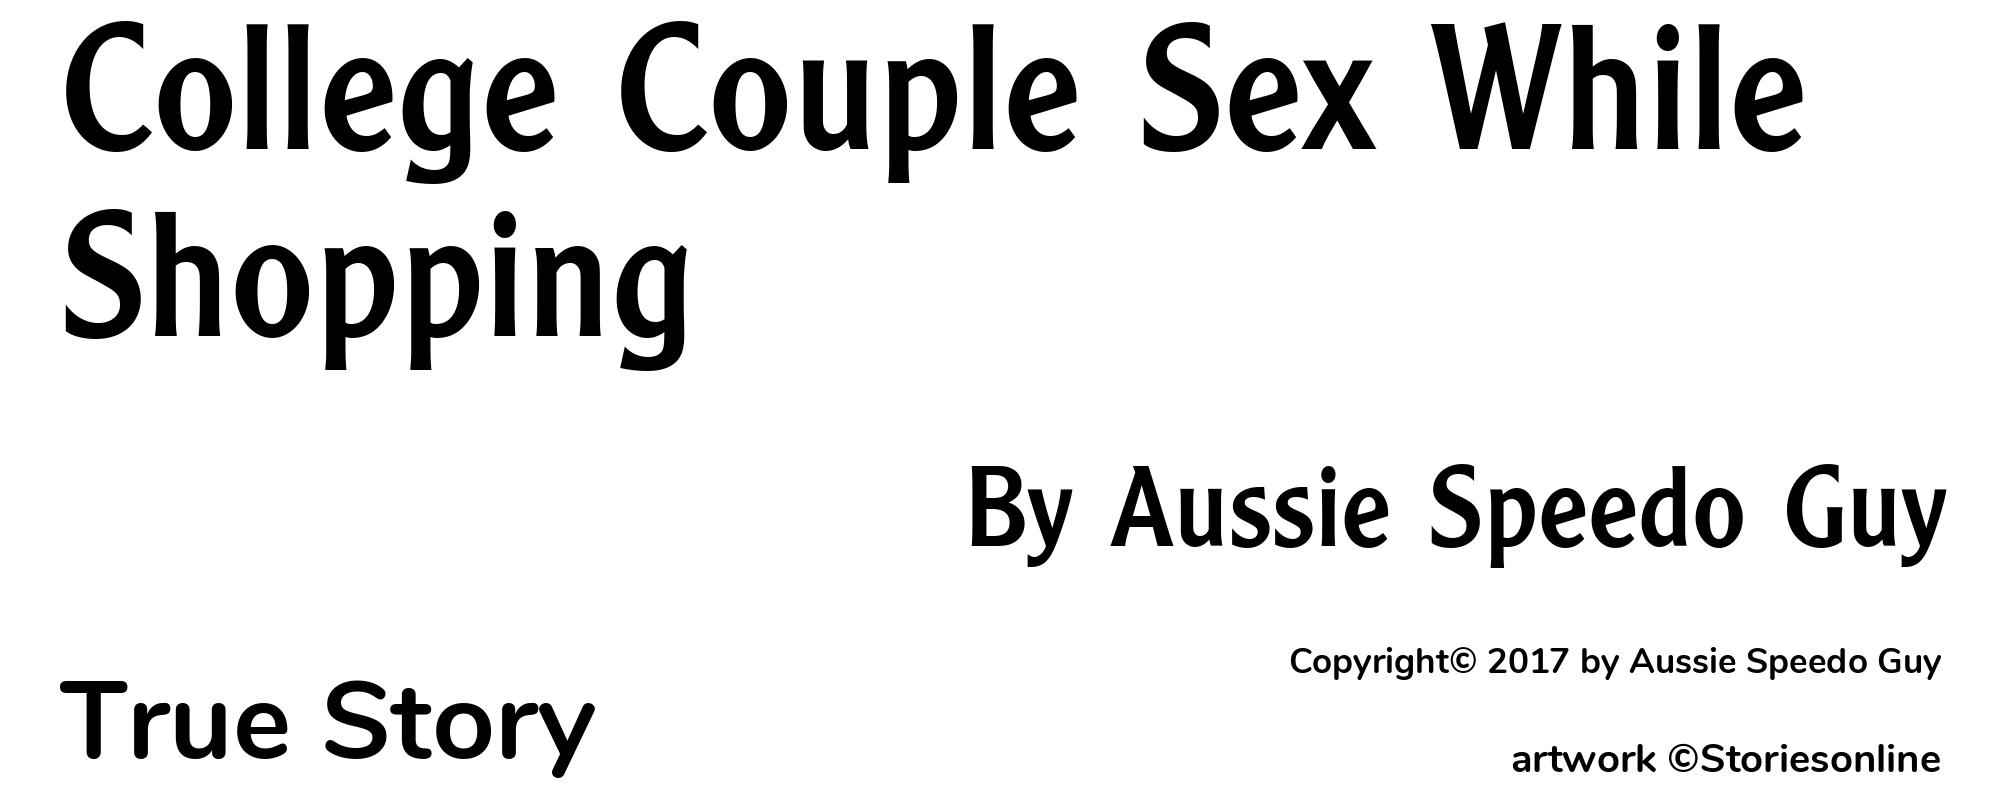 College Couple Sex While Shopping - Cover